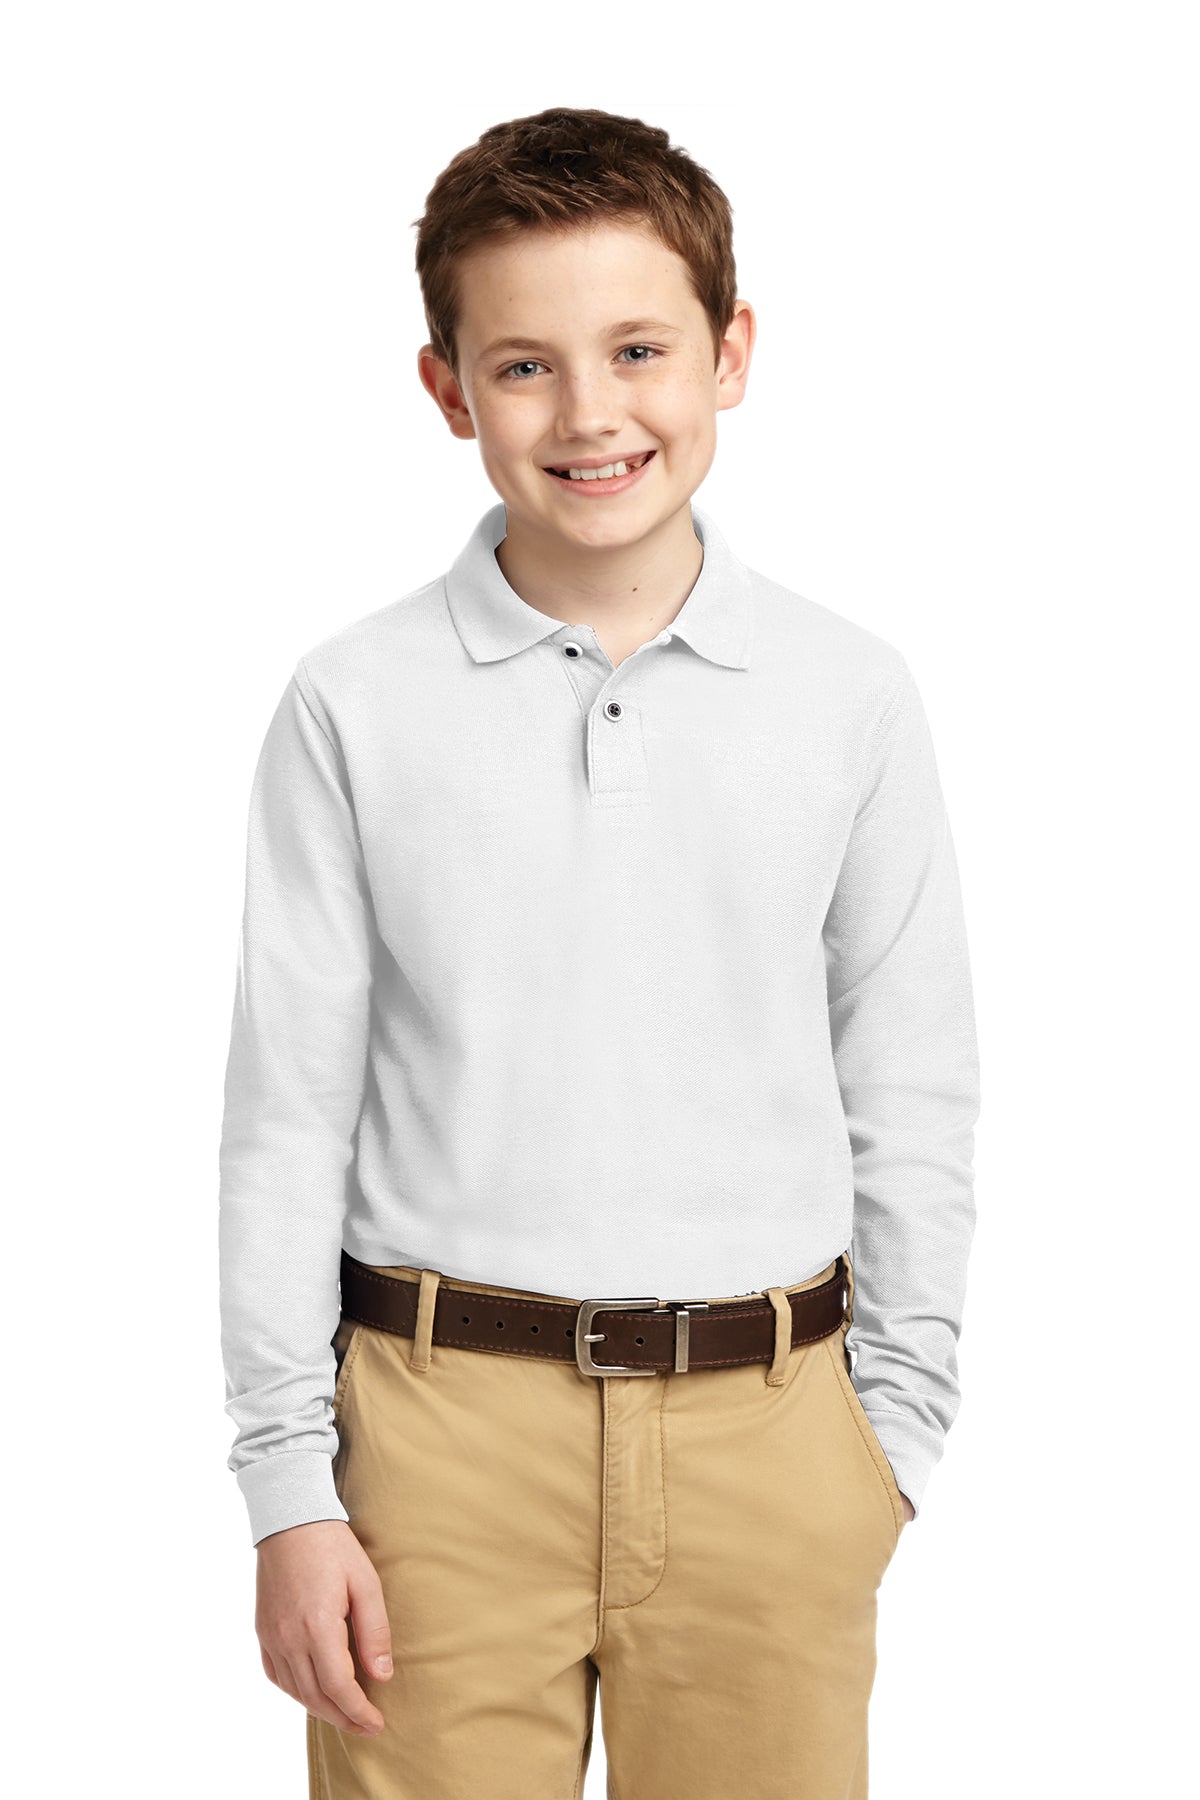 Windsor - YOUTH Long Sleeve Polo - WHITE (Y500LS) - Southern Grace Creations